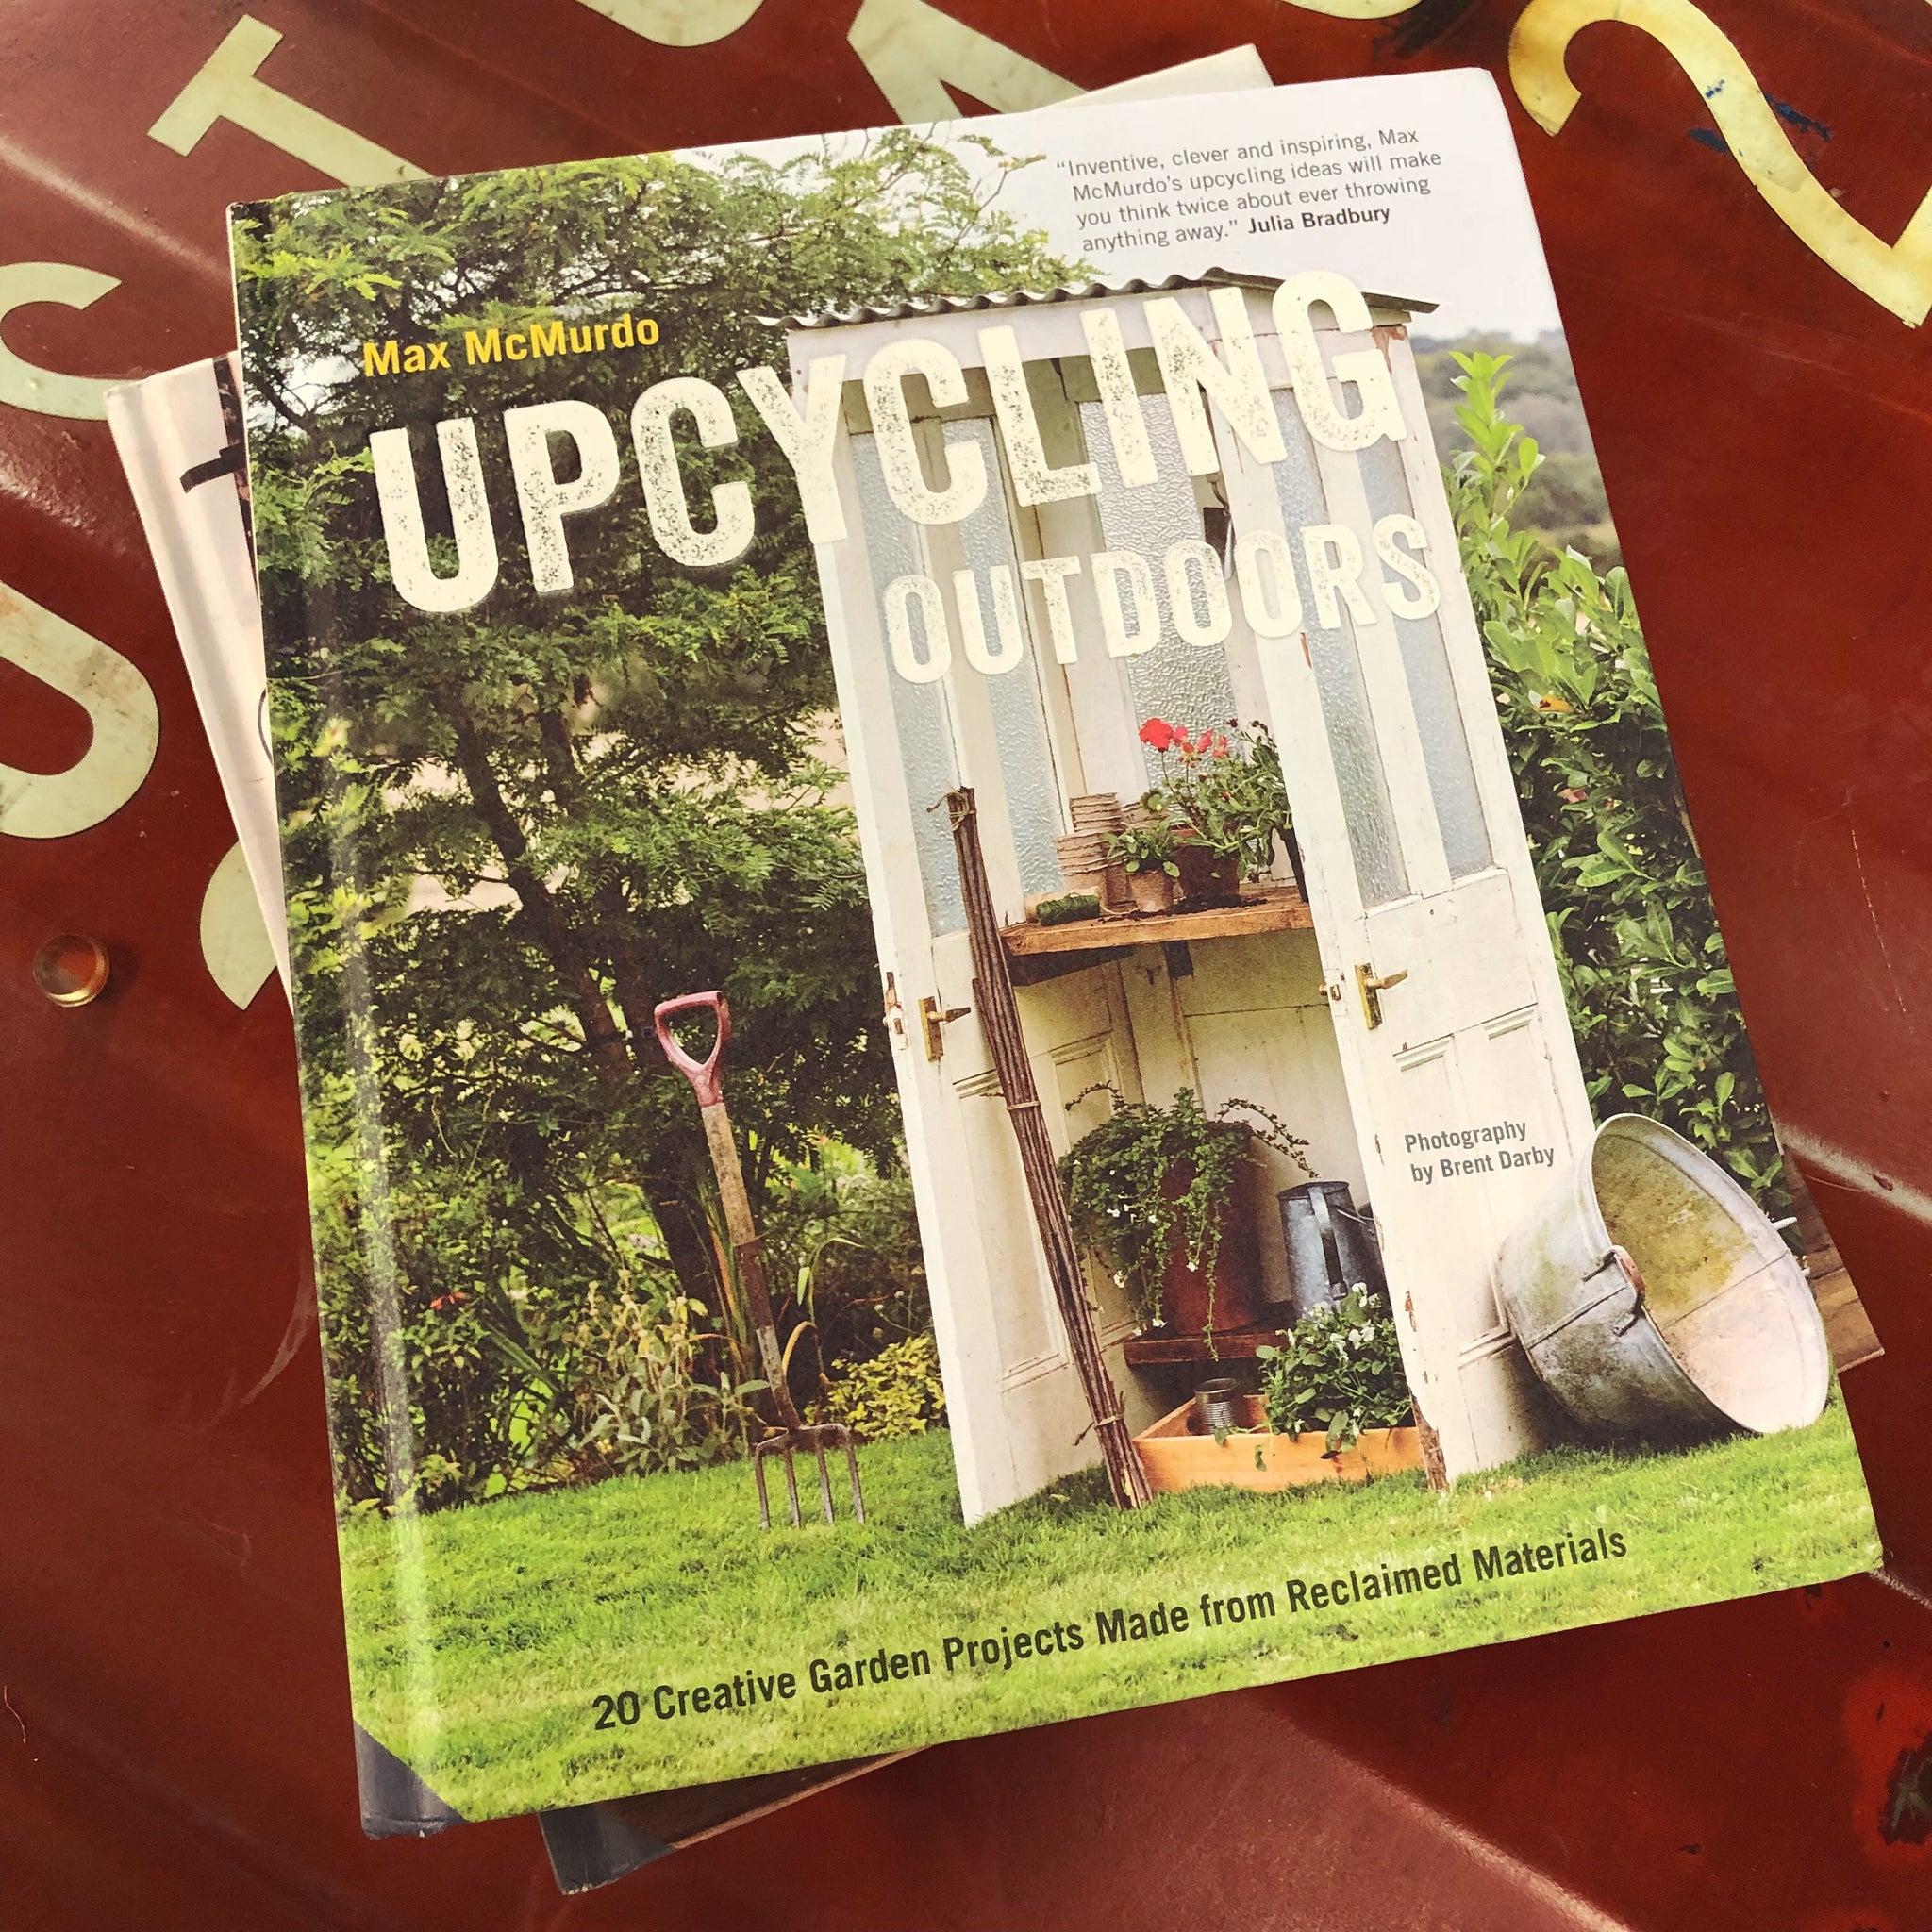 Upcycling Outdoors - signed by Max